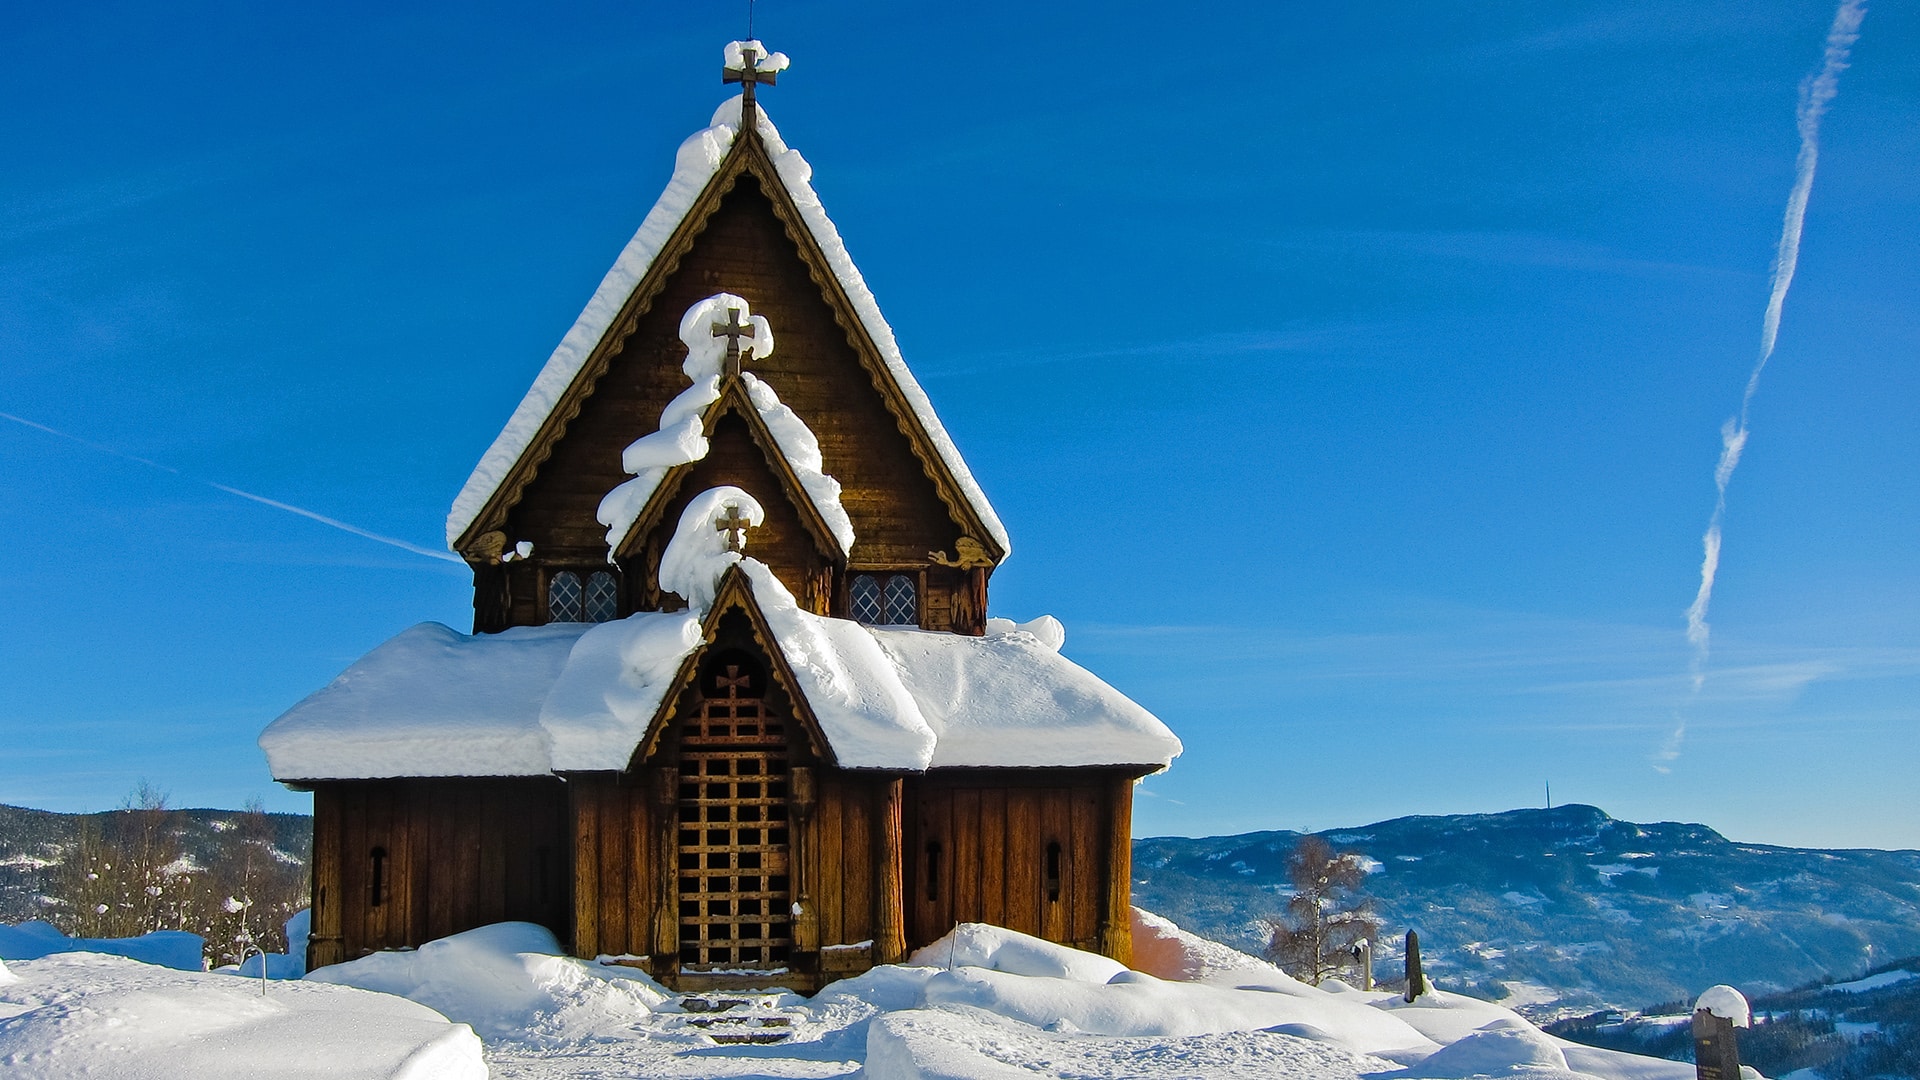 The stave church of Reinli covered in snow on a sunny winter day.